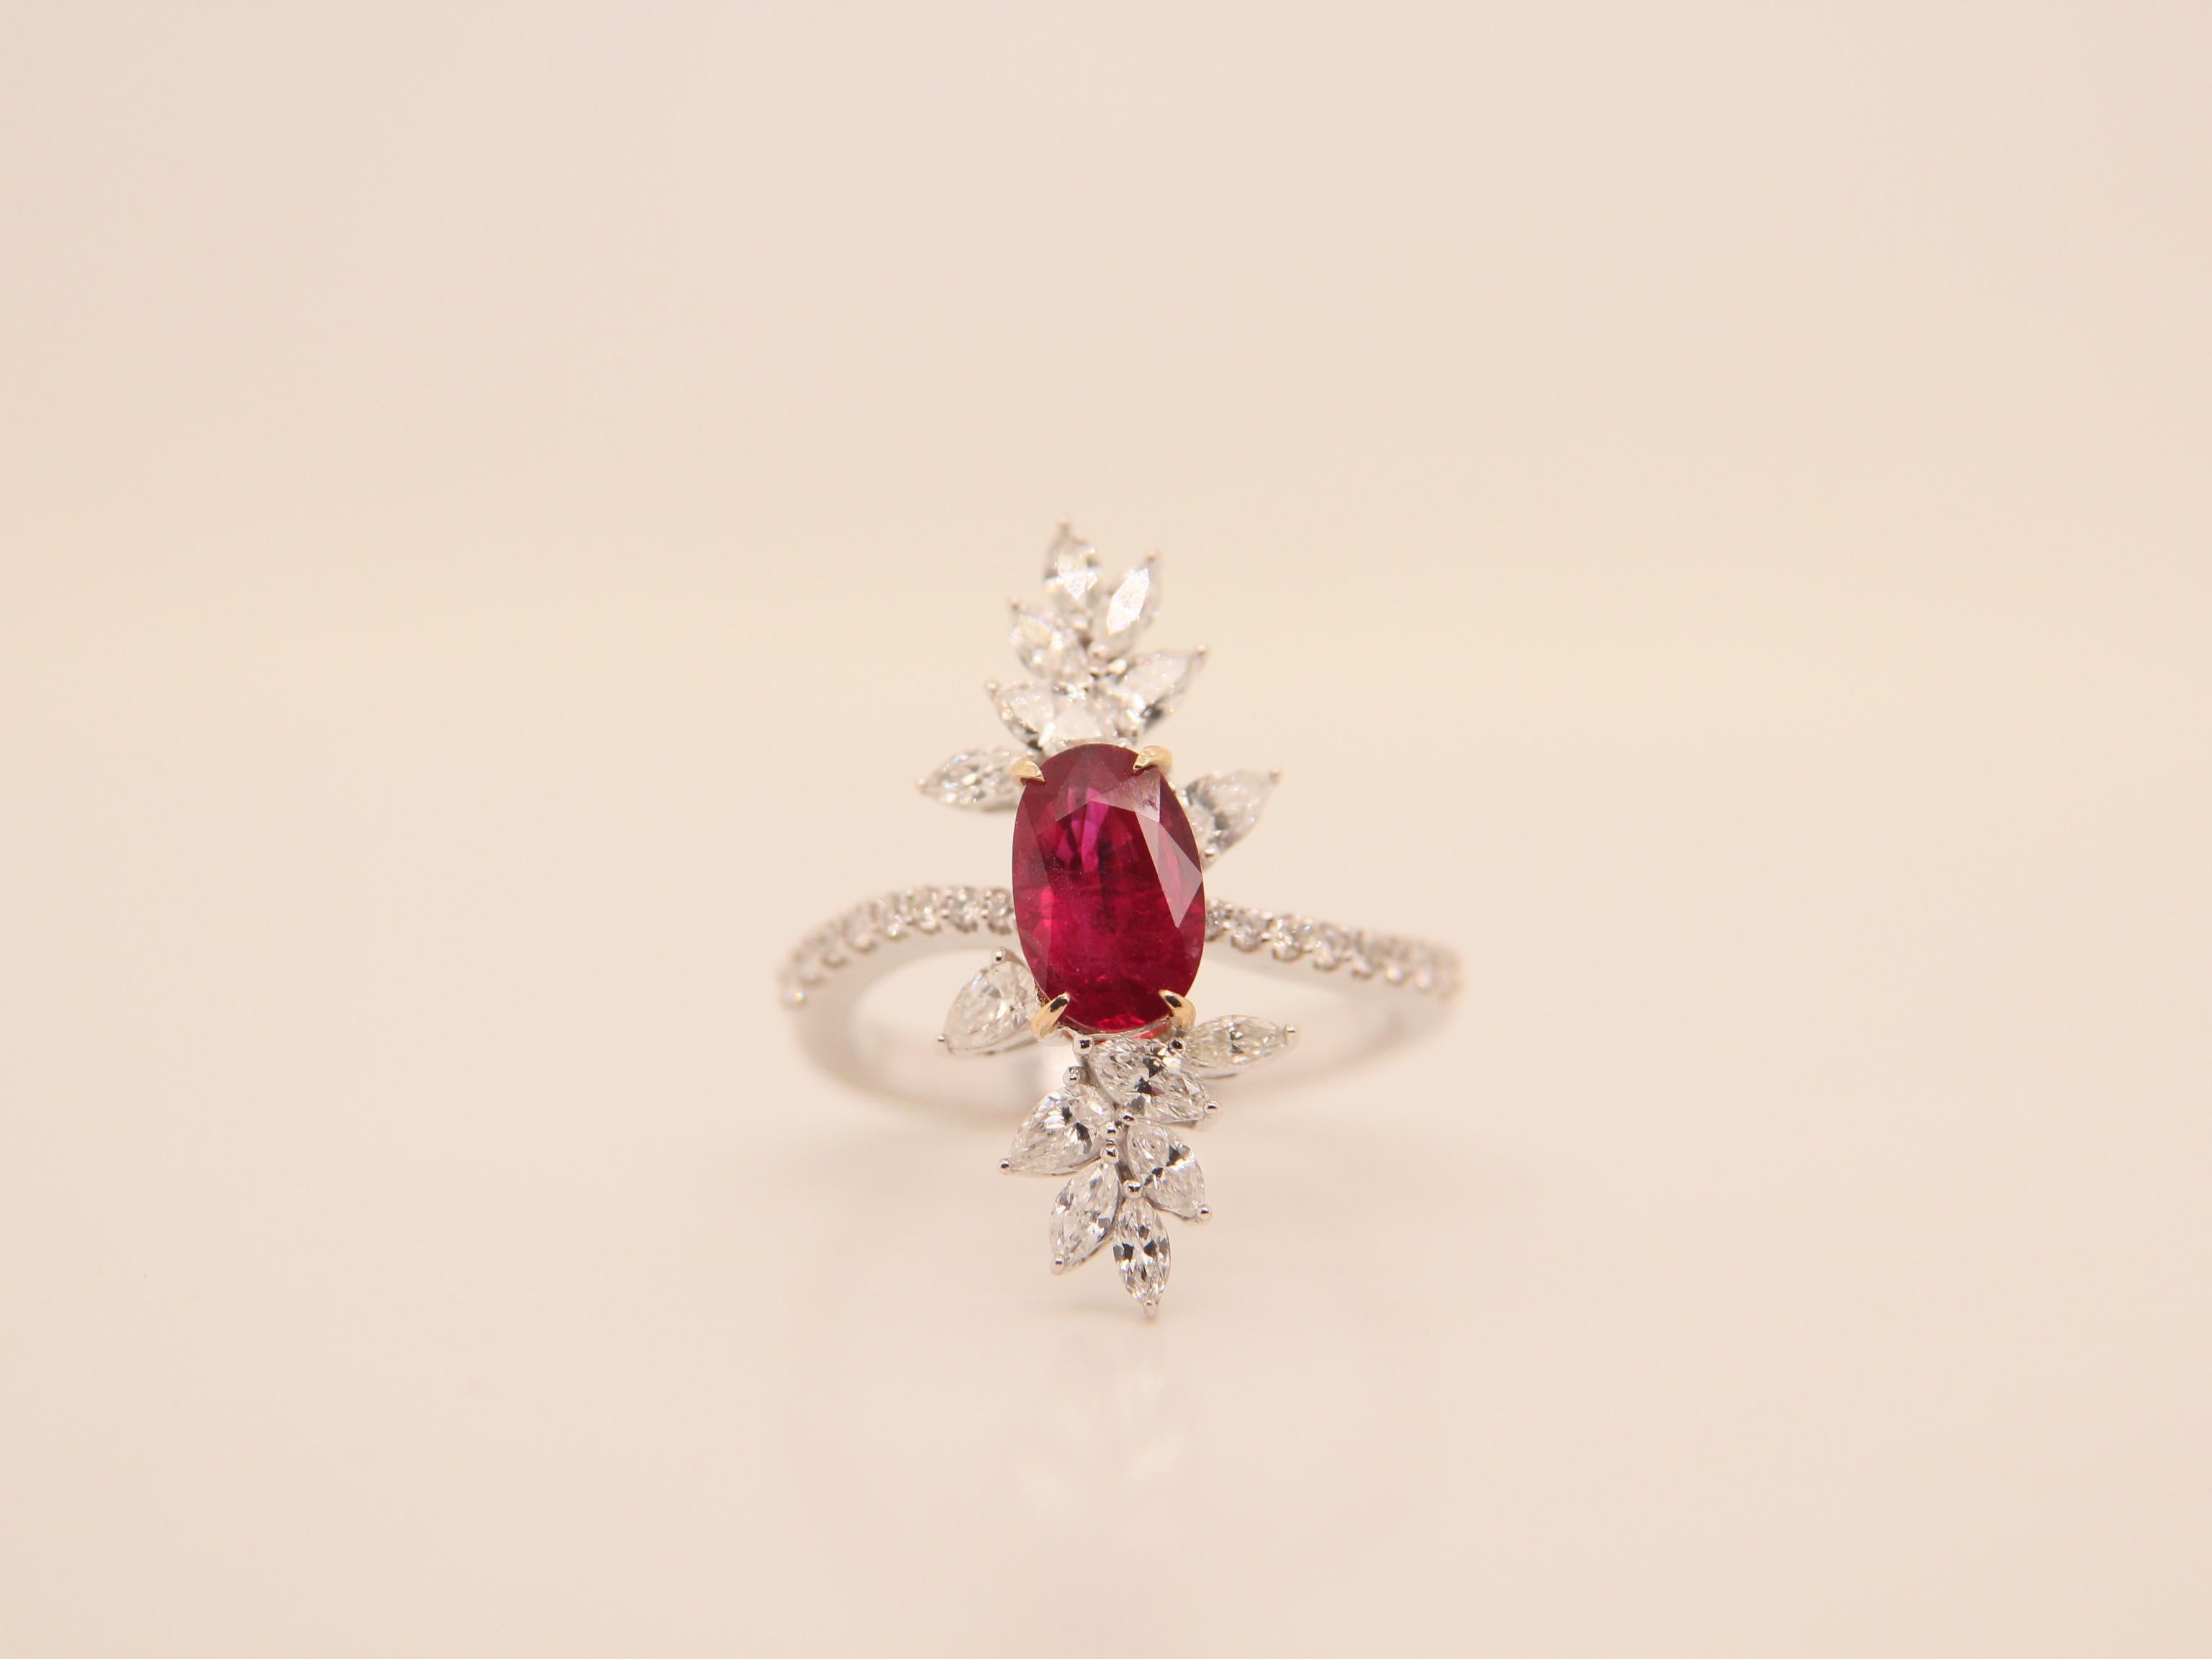 A brand new handcrafted ruby ring by Rewa Jewels. The ring's center stone is 1.47 carat Burmese ruby certified by Gem Research Swisslab (GRS) as natural, unheated, 'Pigeon blood' with the certificate number: 2021-110967. The centre ruby has been set